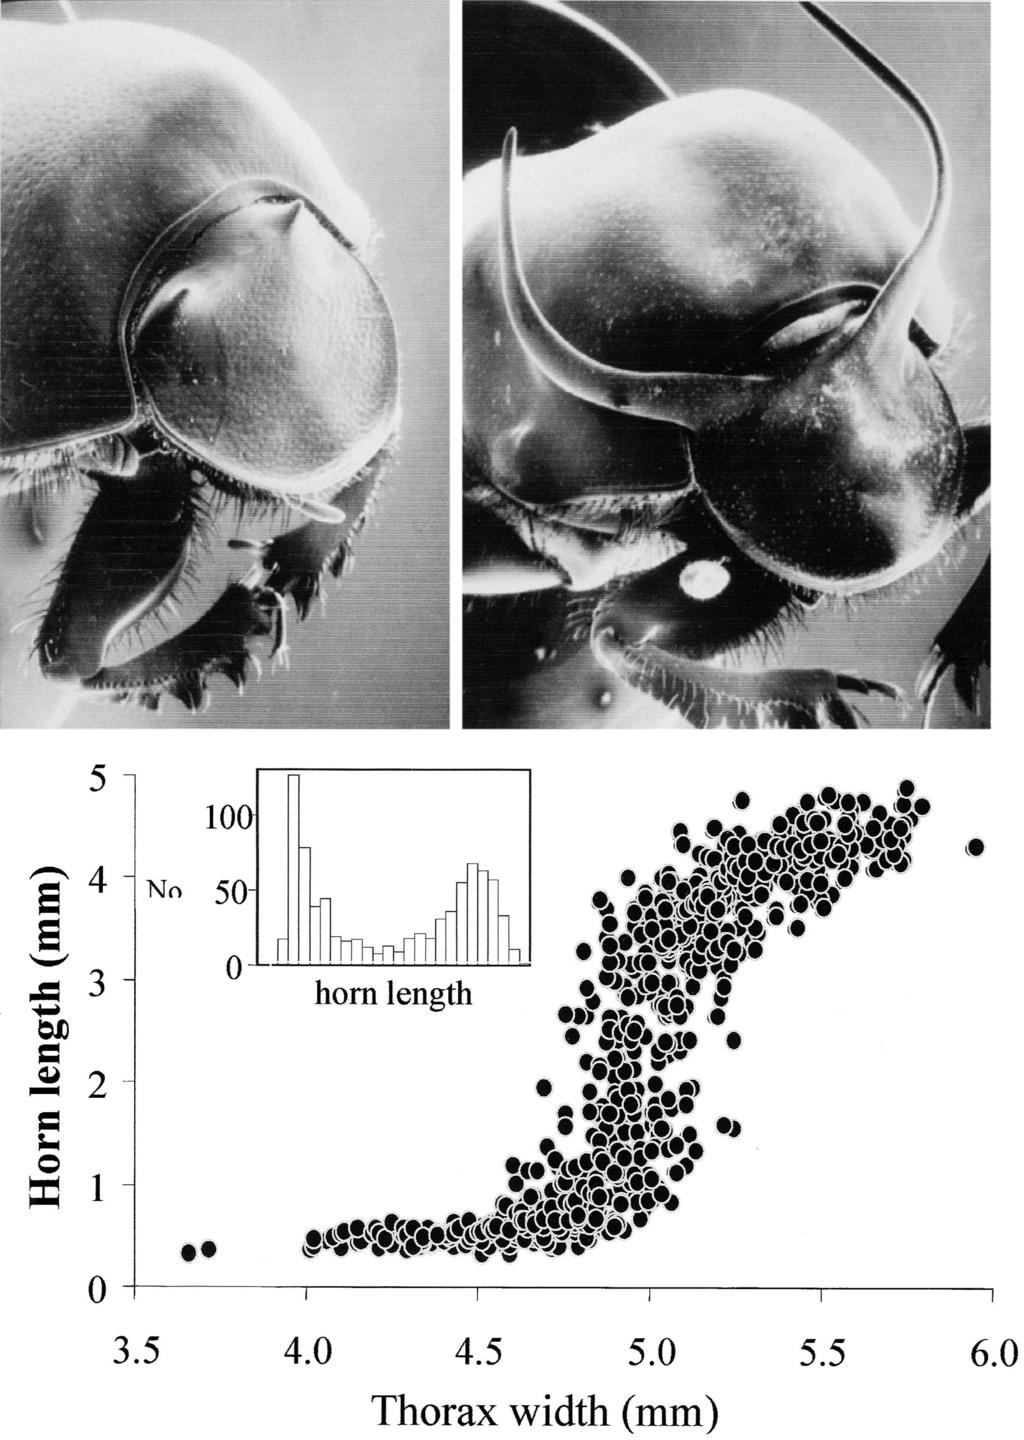 16 EVOLUTION & DEVELOPMENT Vol. 5, No. 1, January February 2003 Fig. 7. Horn polyphenism in males of the beetle Onthophagus taurus. Horns are sigmoidally allometric with body size.